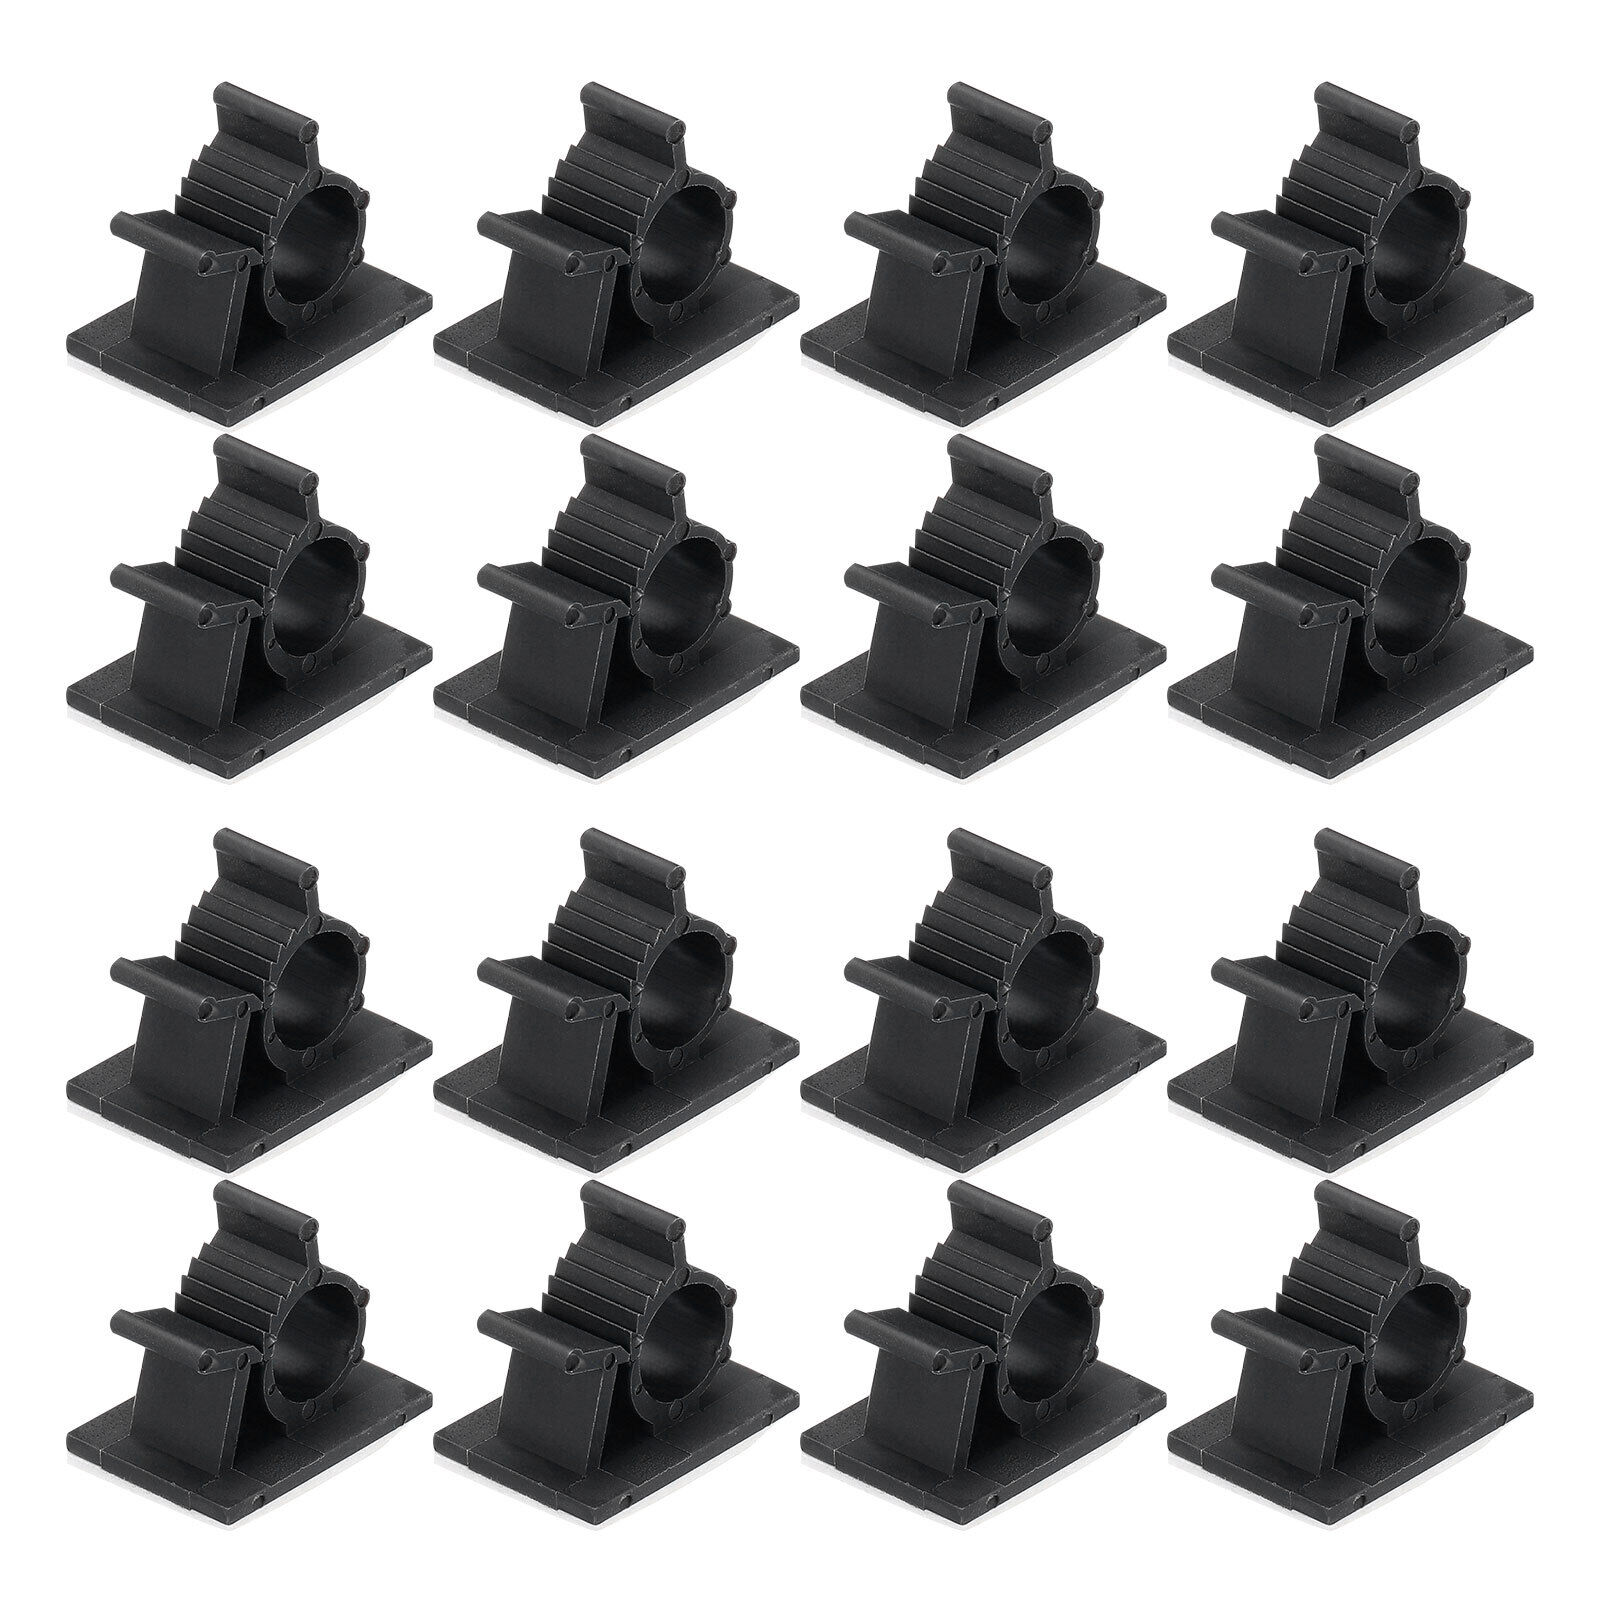 30Pcs Adhesive Cable Management Clip PE Cord Clamps 8-10mm Adjustable